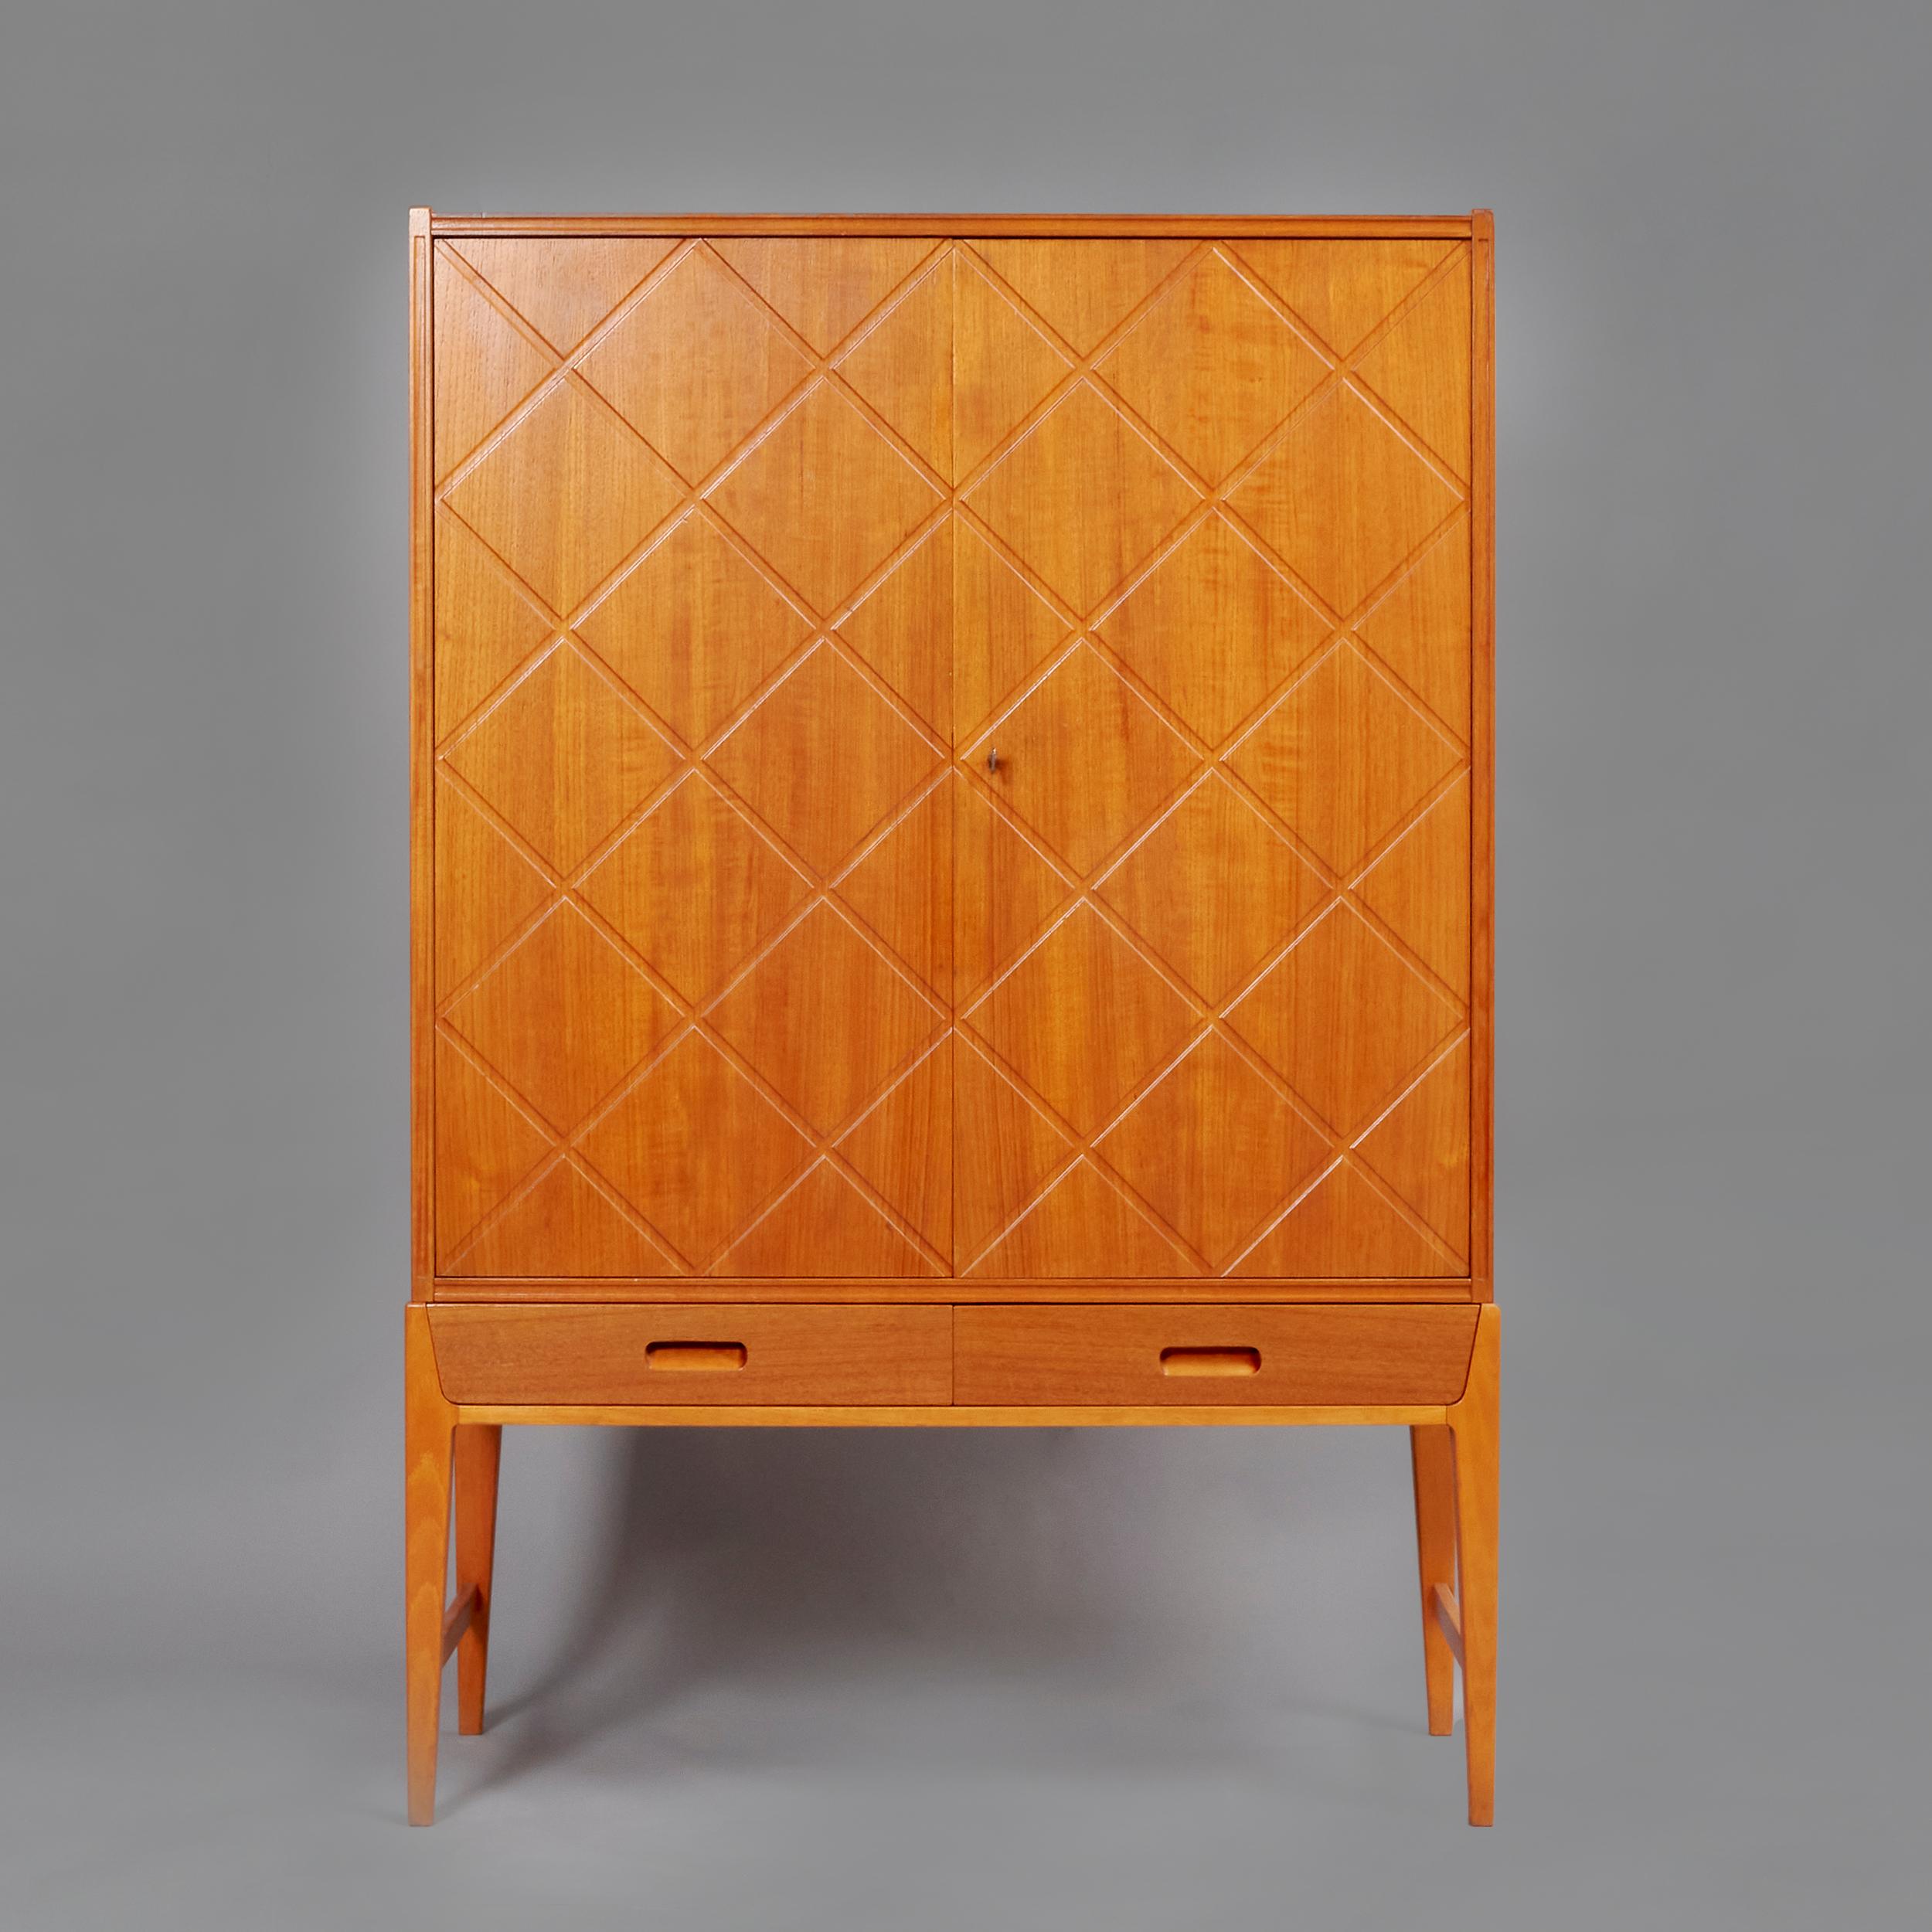 Cabinet, Linen Cabinet in teak wood designed by Eric Johansson for Abrahamssons Möbelfabrik. Sweden, 50s.

Featuring an elaborate carved decoration in diagonal squares and elegant disposition of drawers. 

Excellent restored condition that may